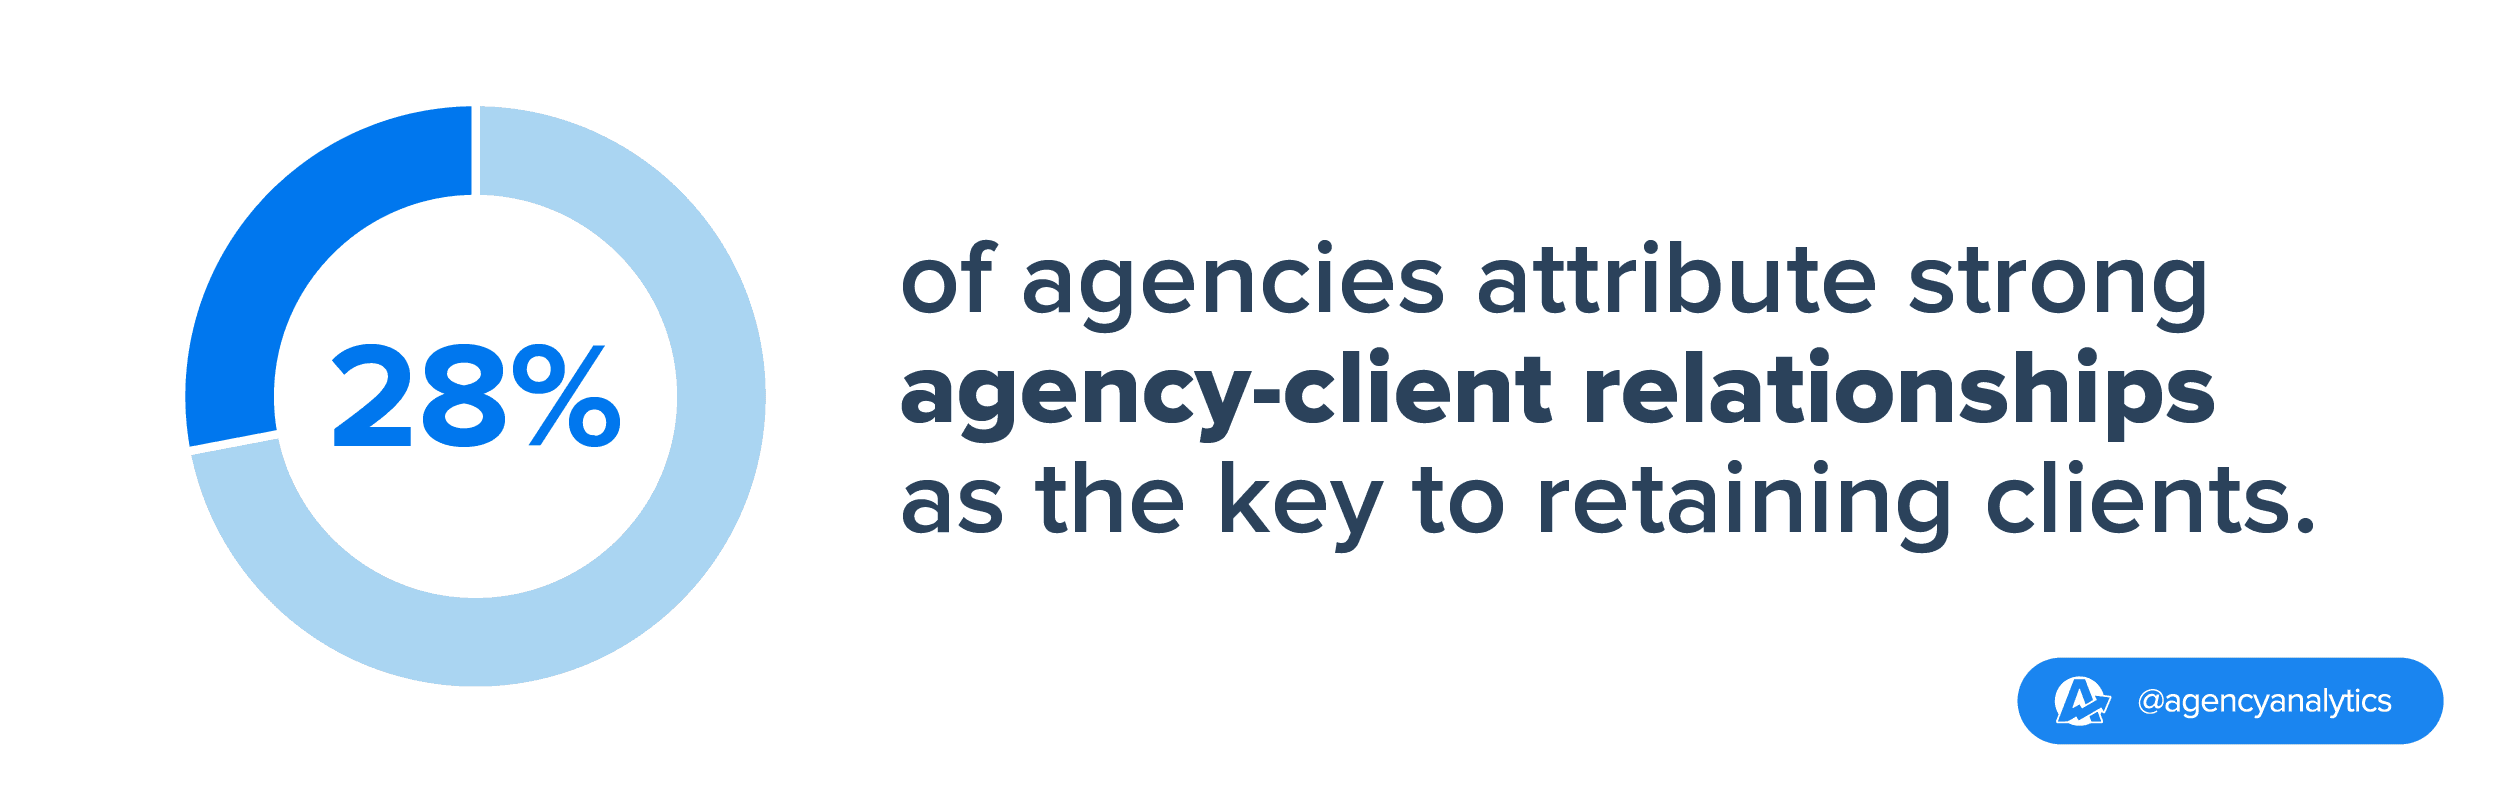 28% of agencies say that a strong agency-client relationship is key to retaining clients 